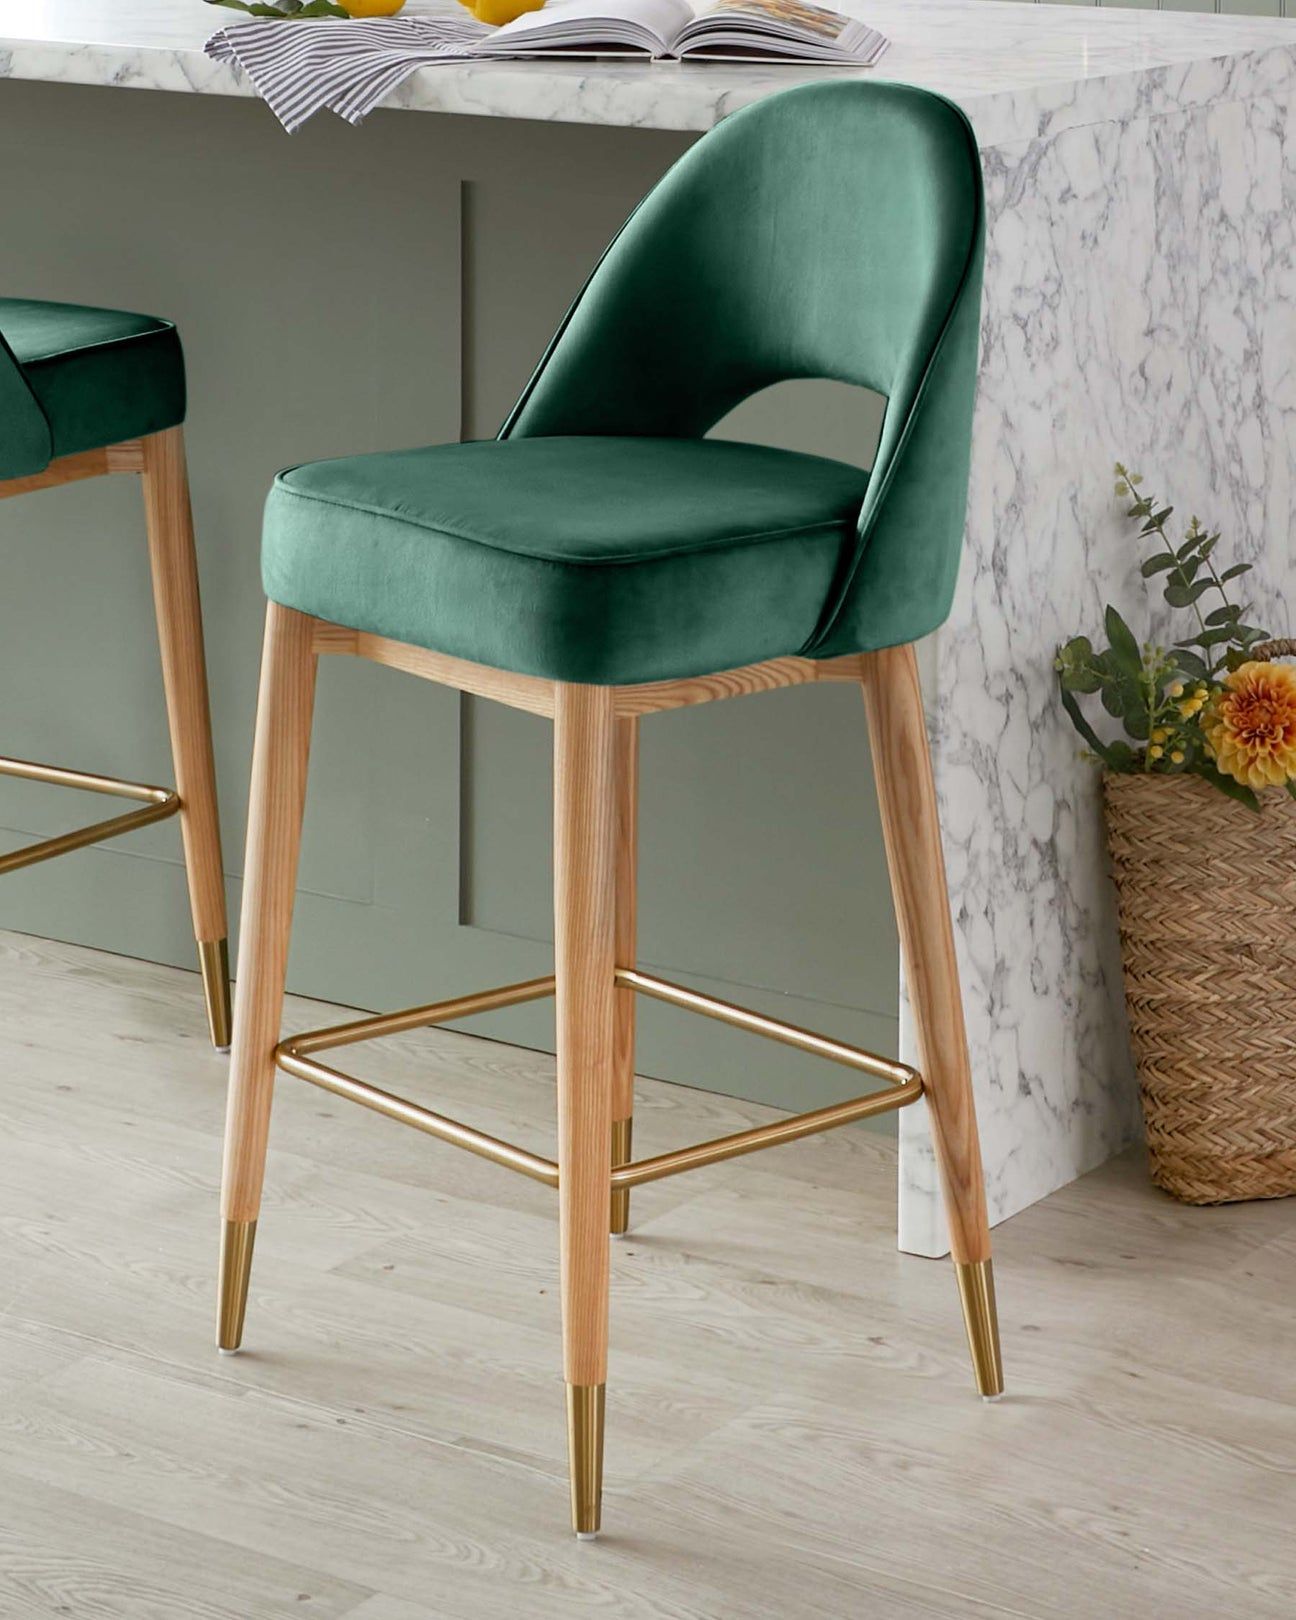 Functional Bar Chairs for Stylish Seating